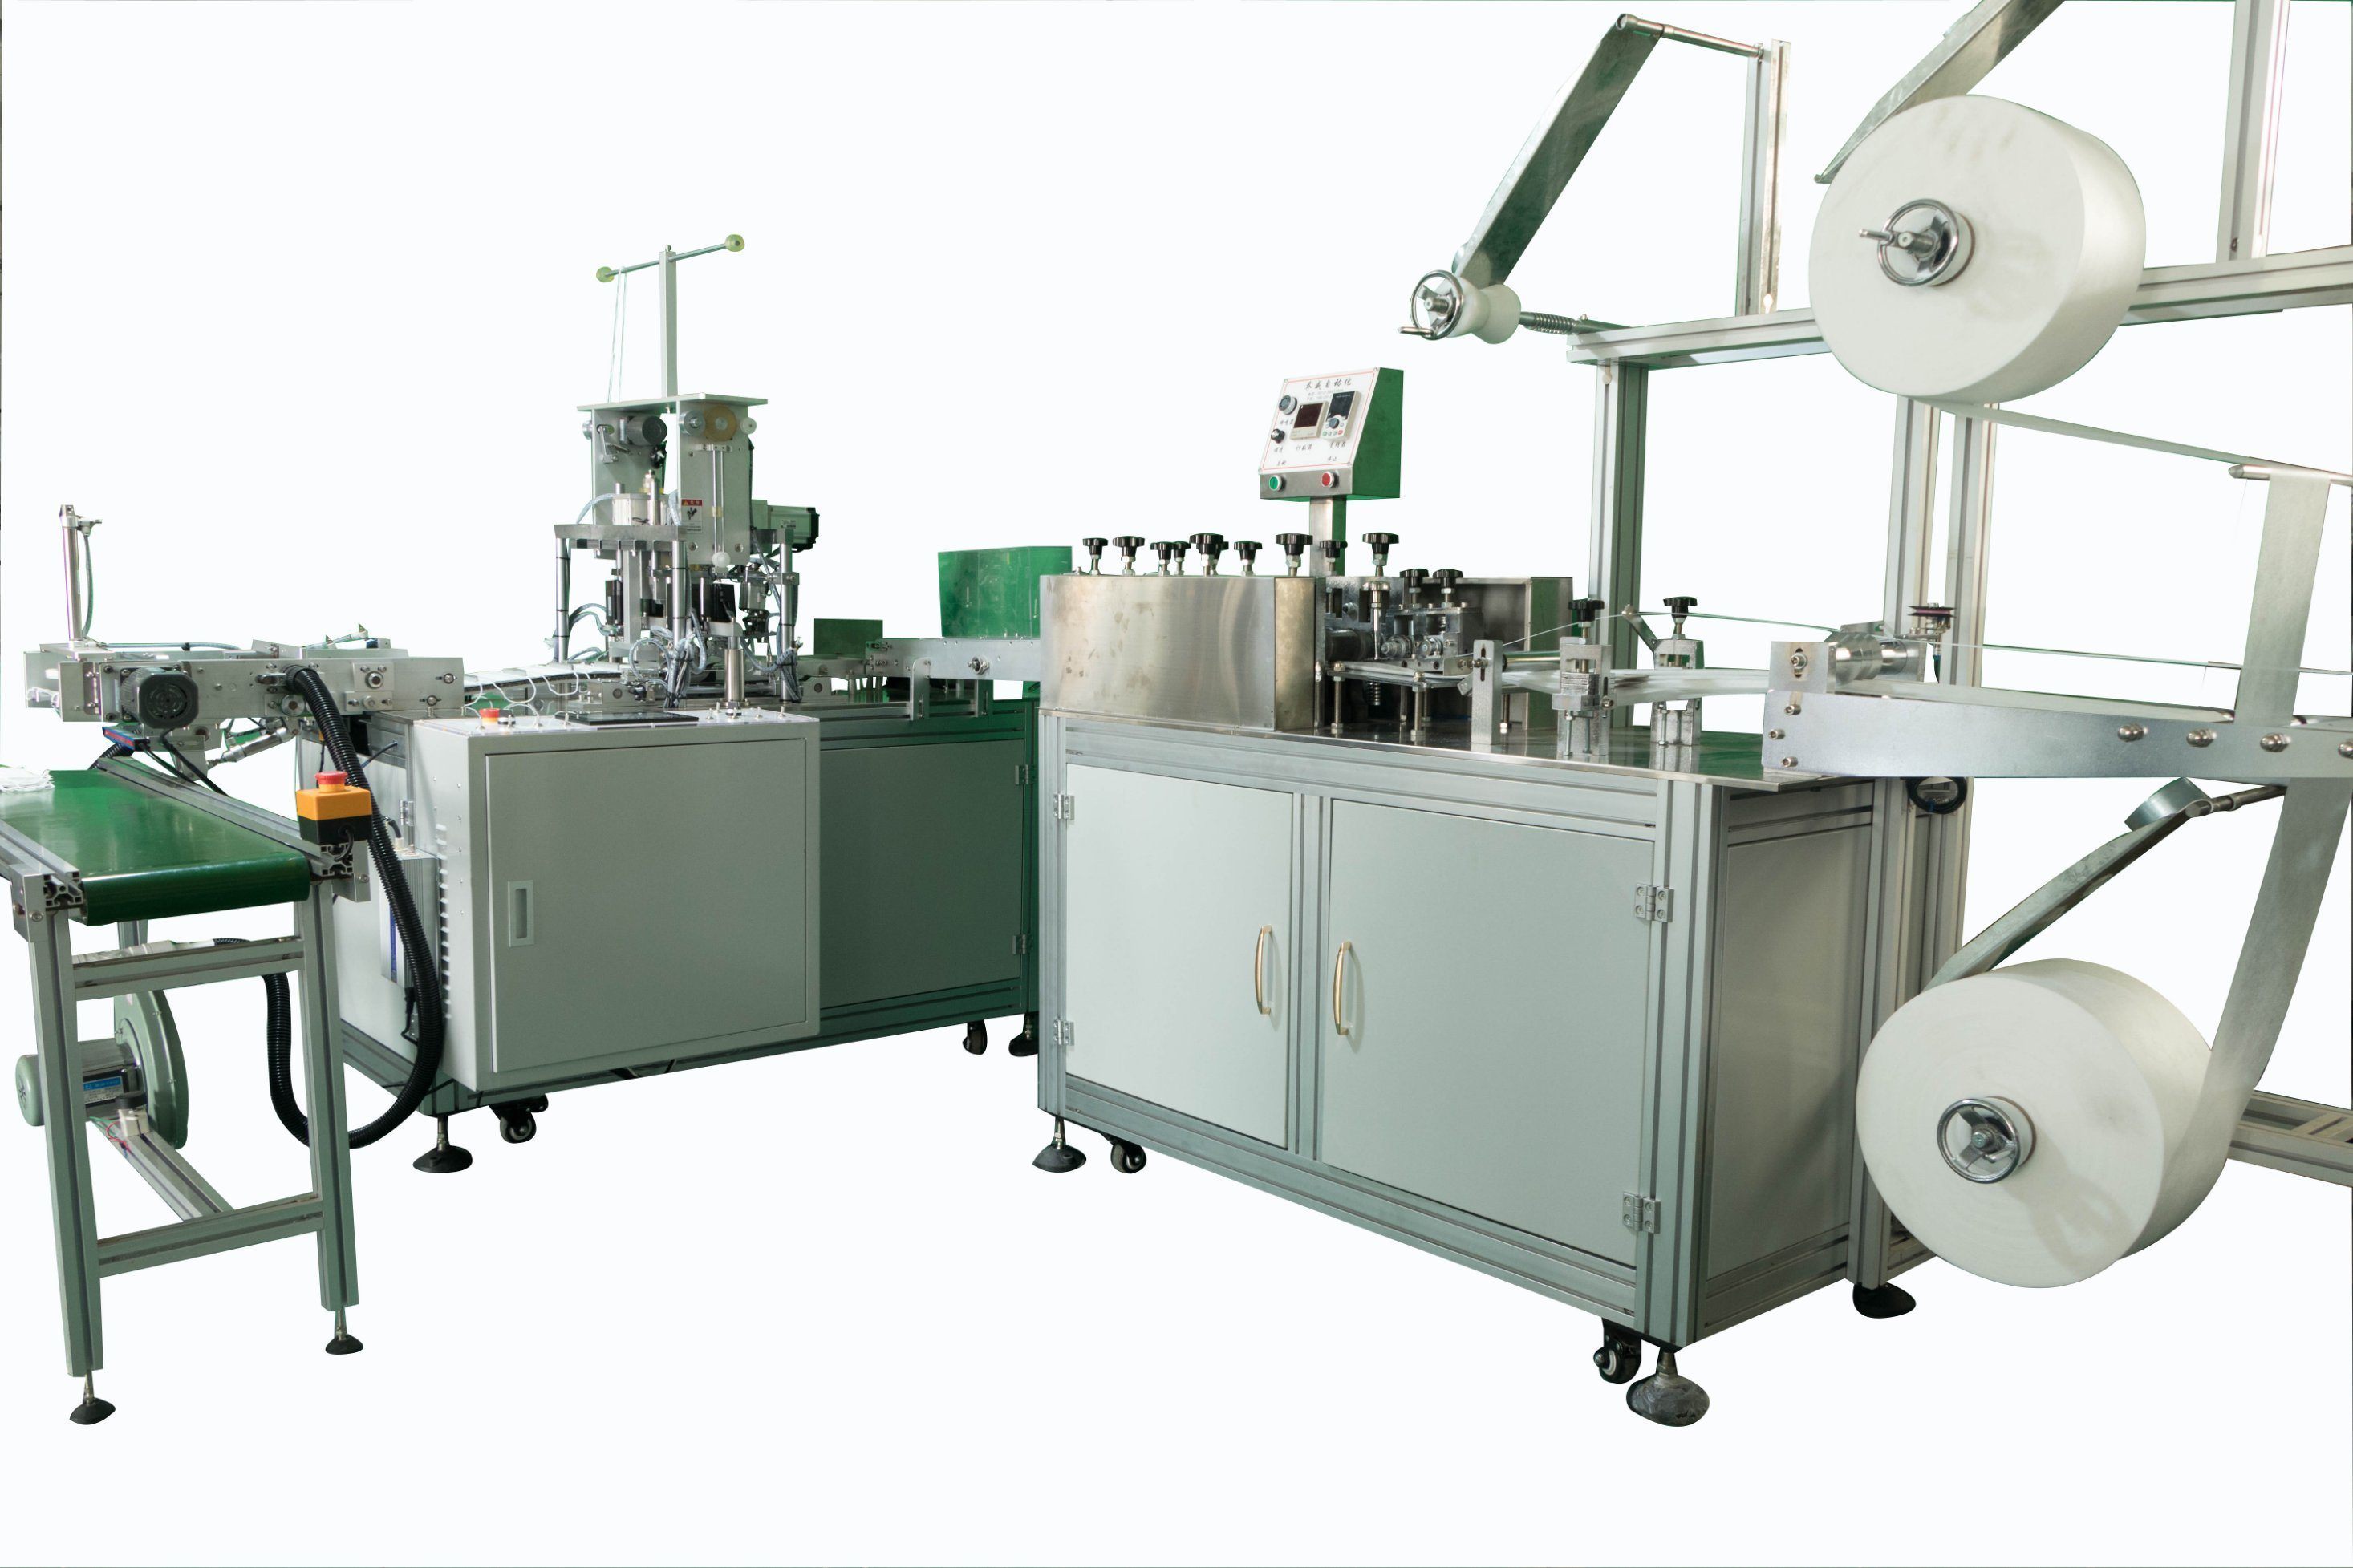 Cover Cosmetic Ring Frame Textile Machinery Inner Ear-Loop Welding Machine (Air Cylinder Type)